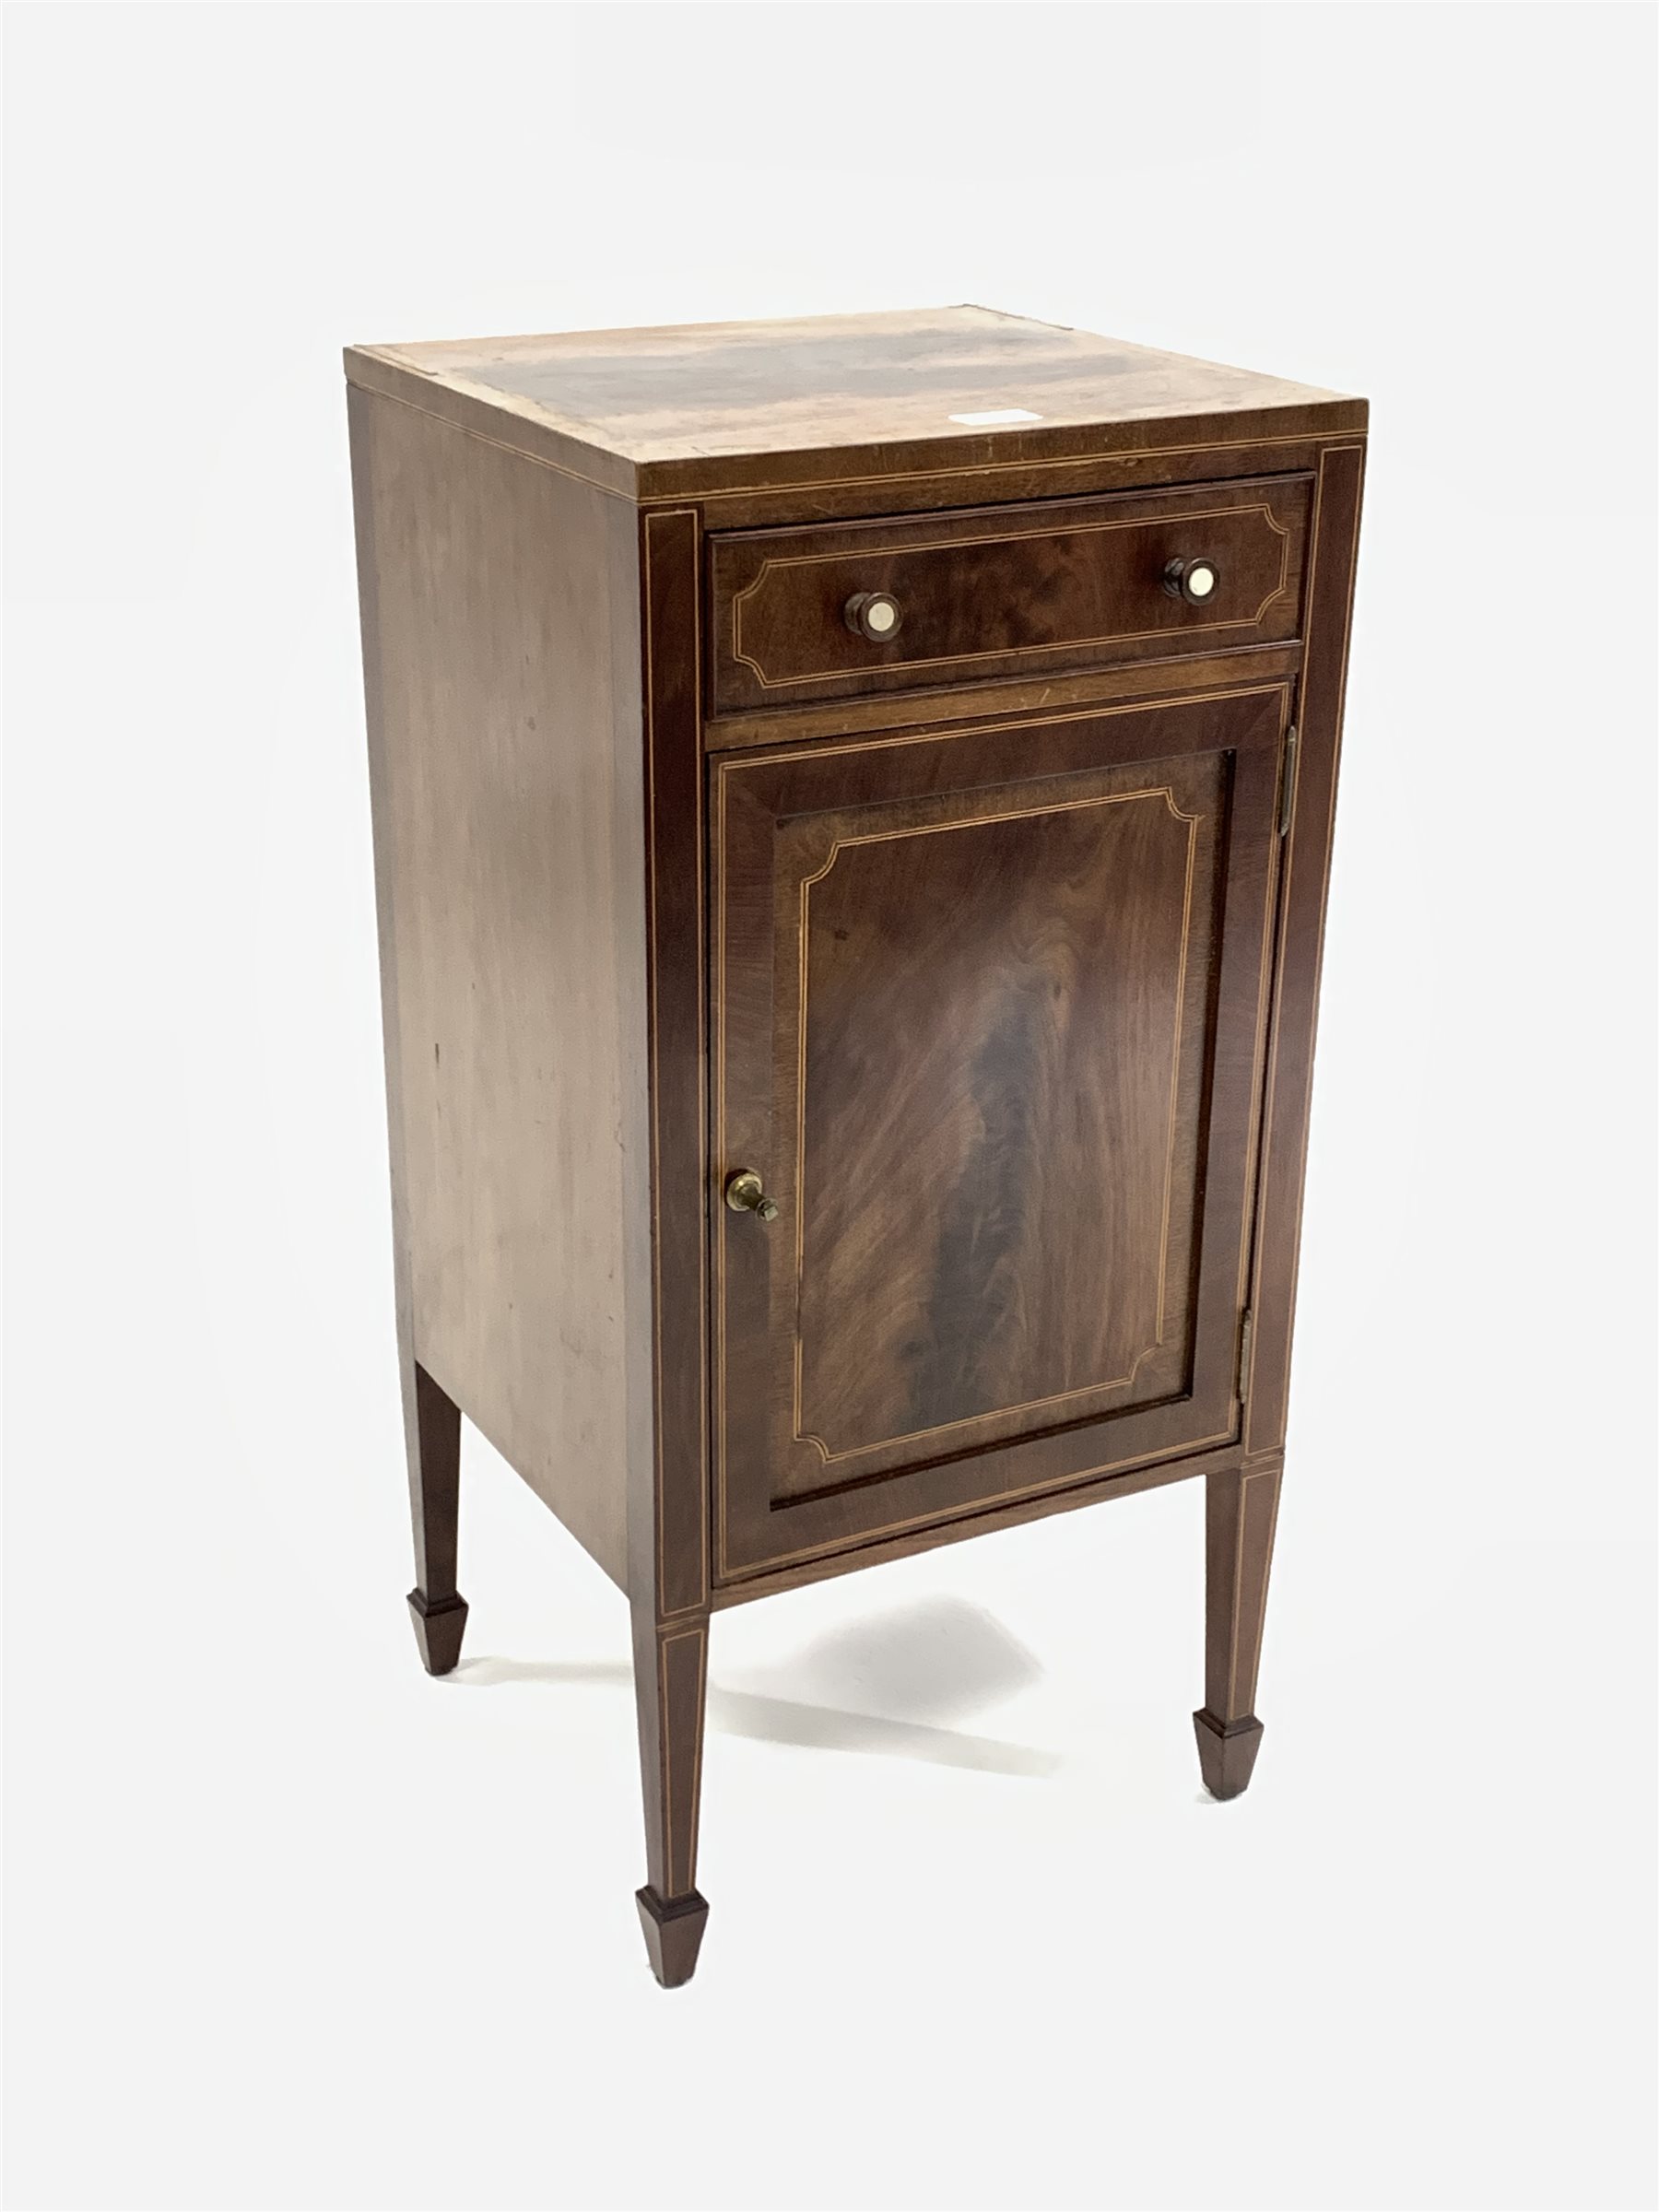 Edwardian cross banded mahogany and box wood and ebony strung bedside cabinet by Maple & Co, fitted - Image 2 of 7